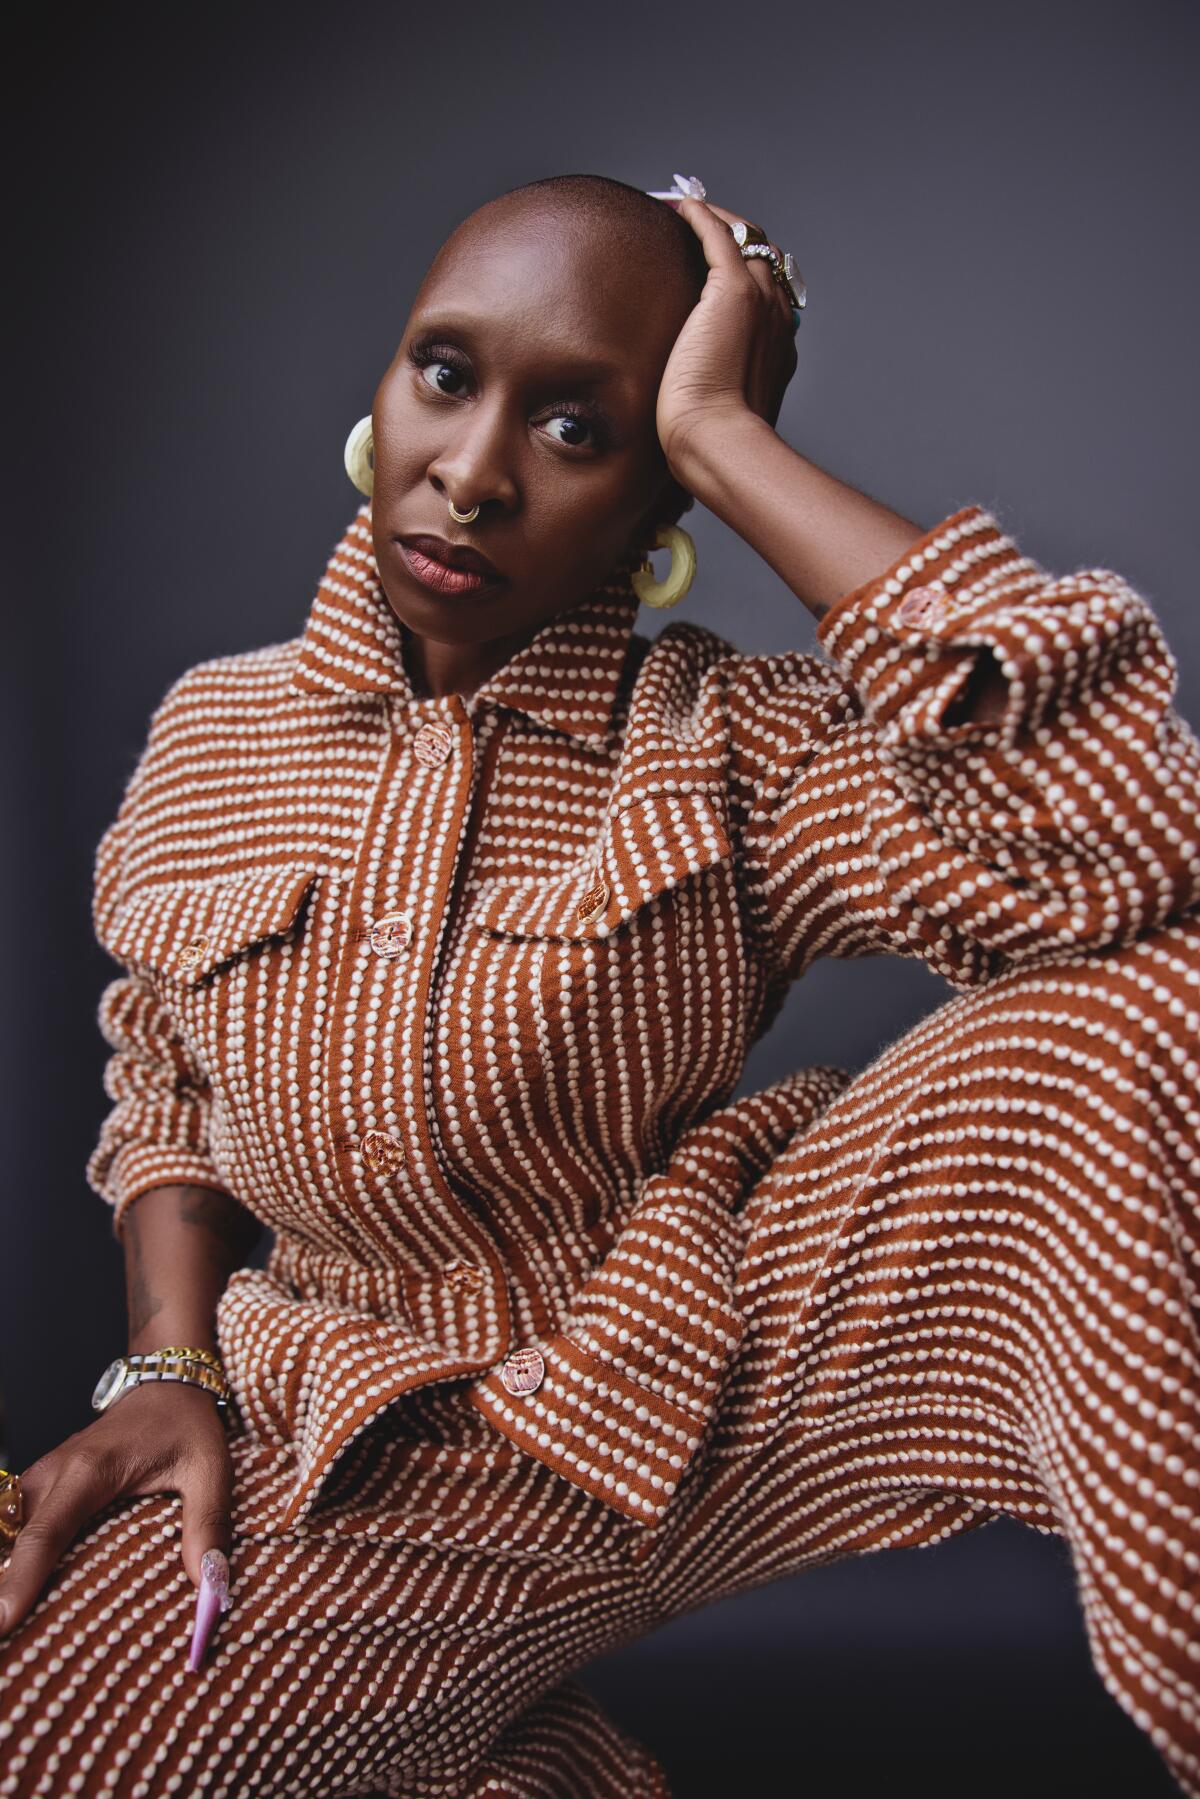 Cynthia Erivo poses for a portrait, leaning her head on her hand.